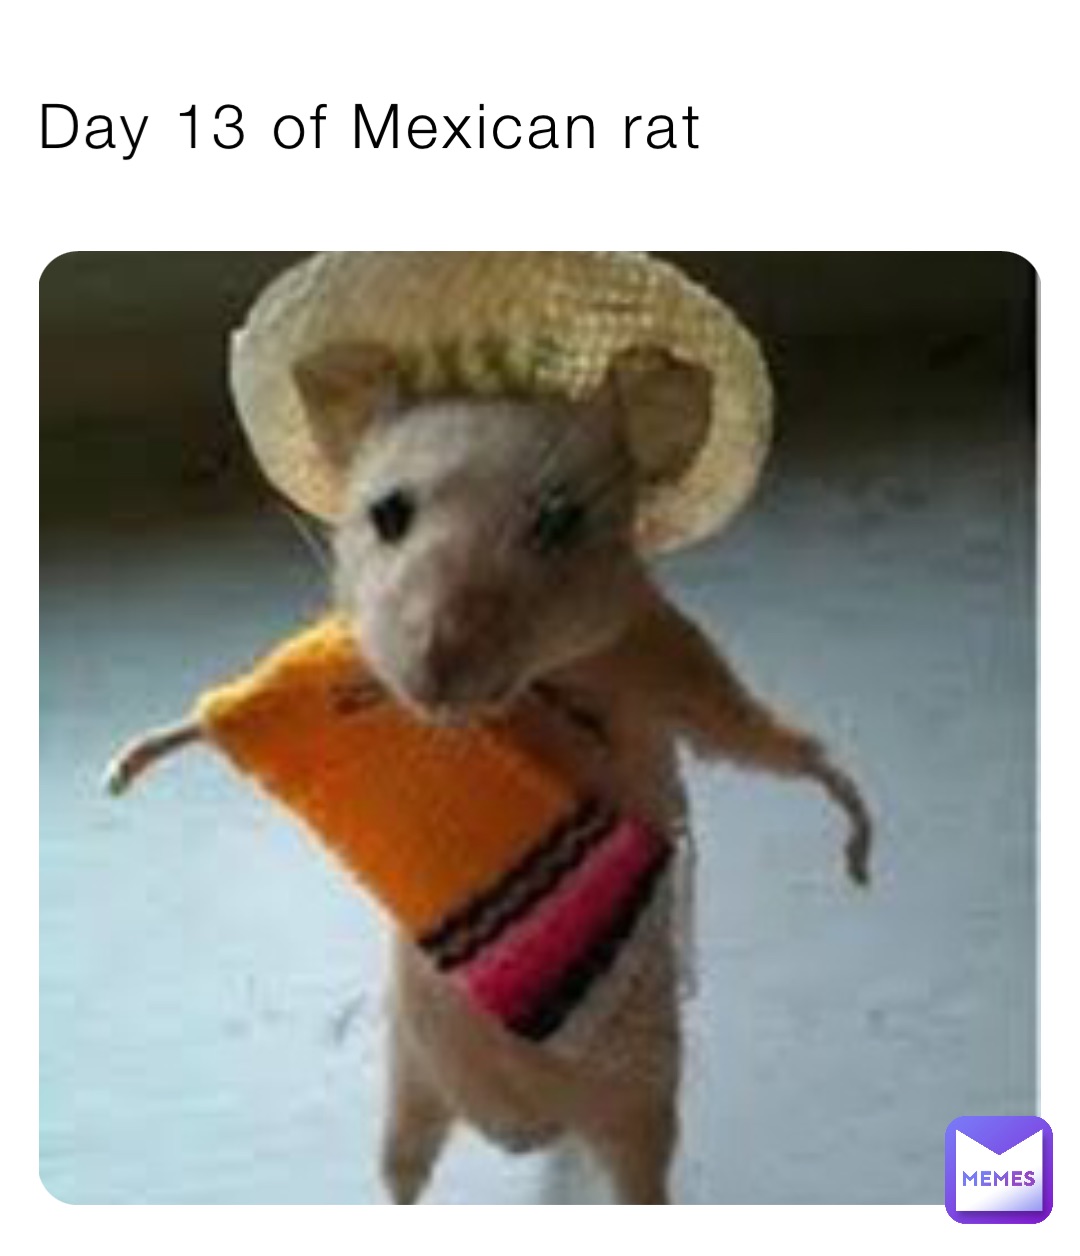 Day 13 of Mexican rat